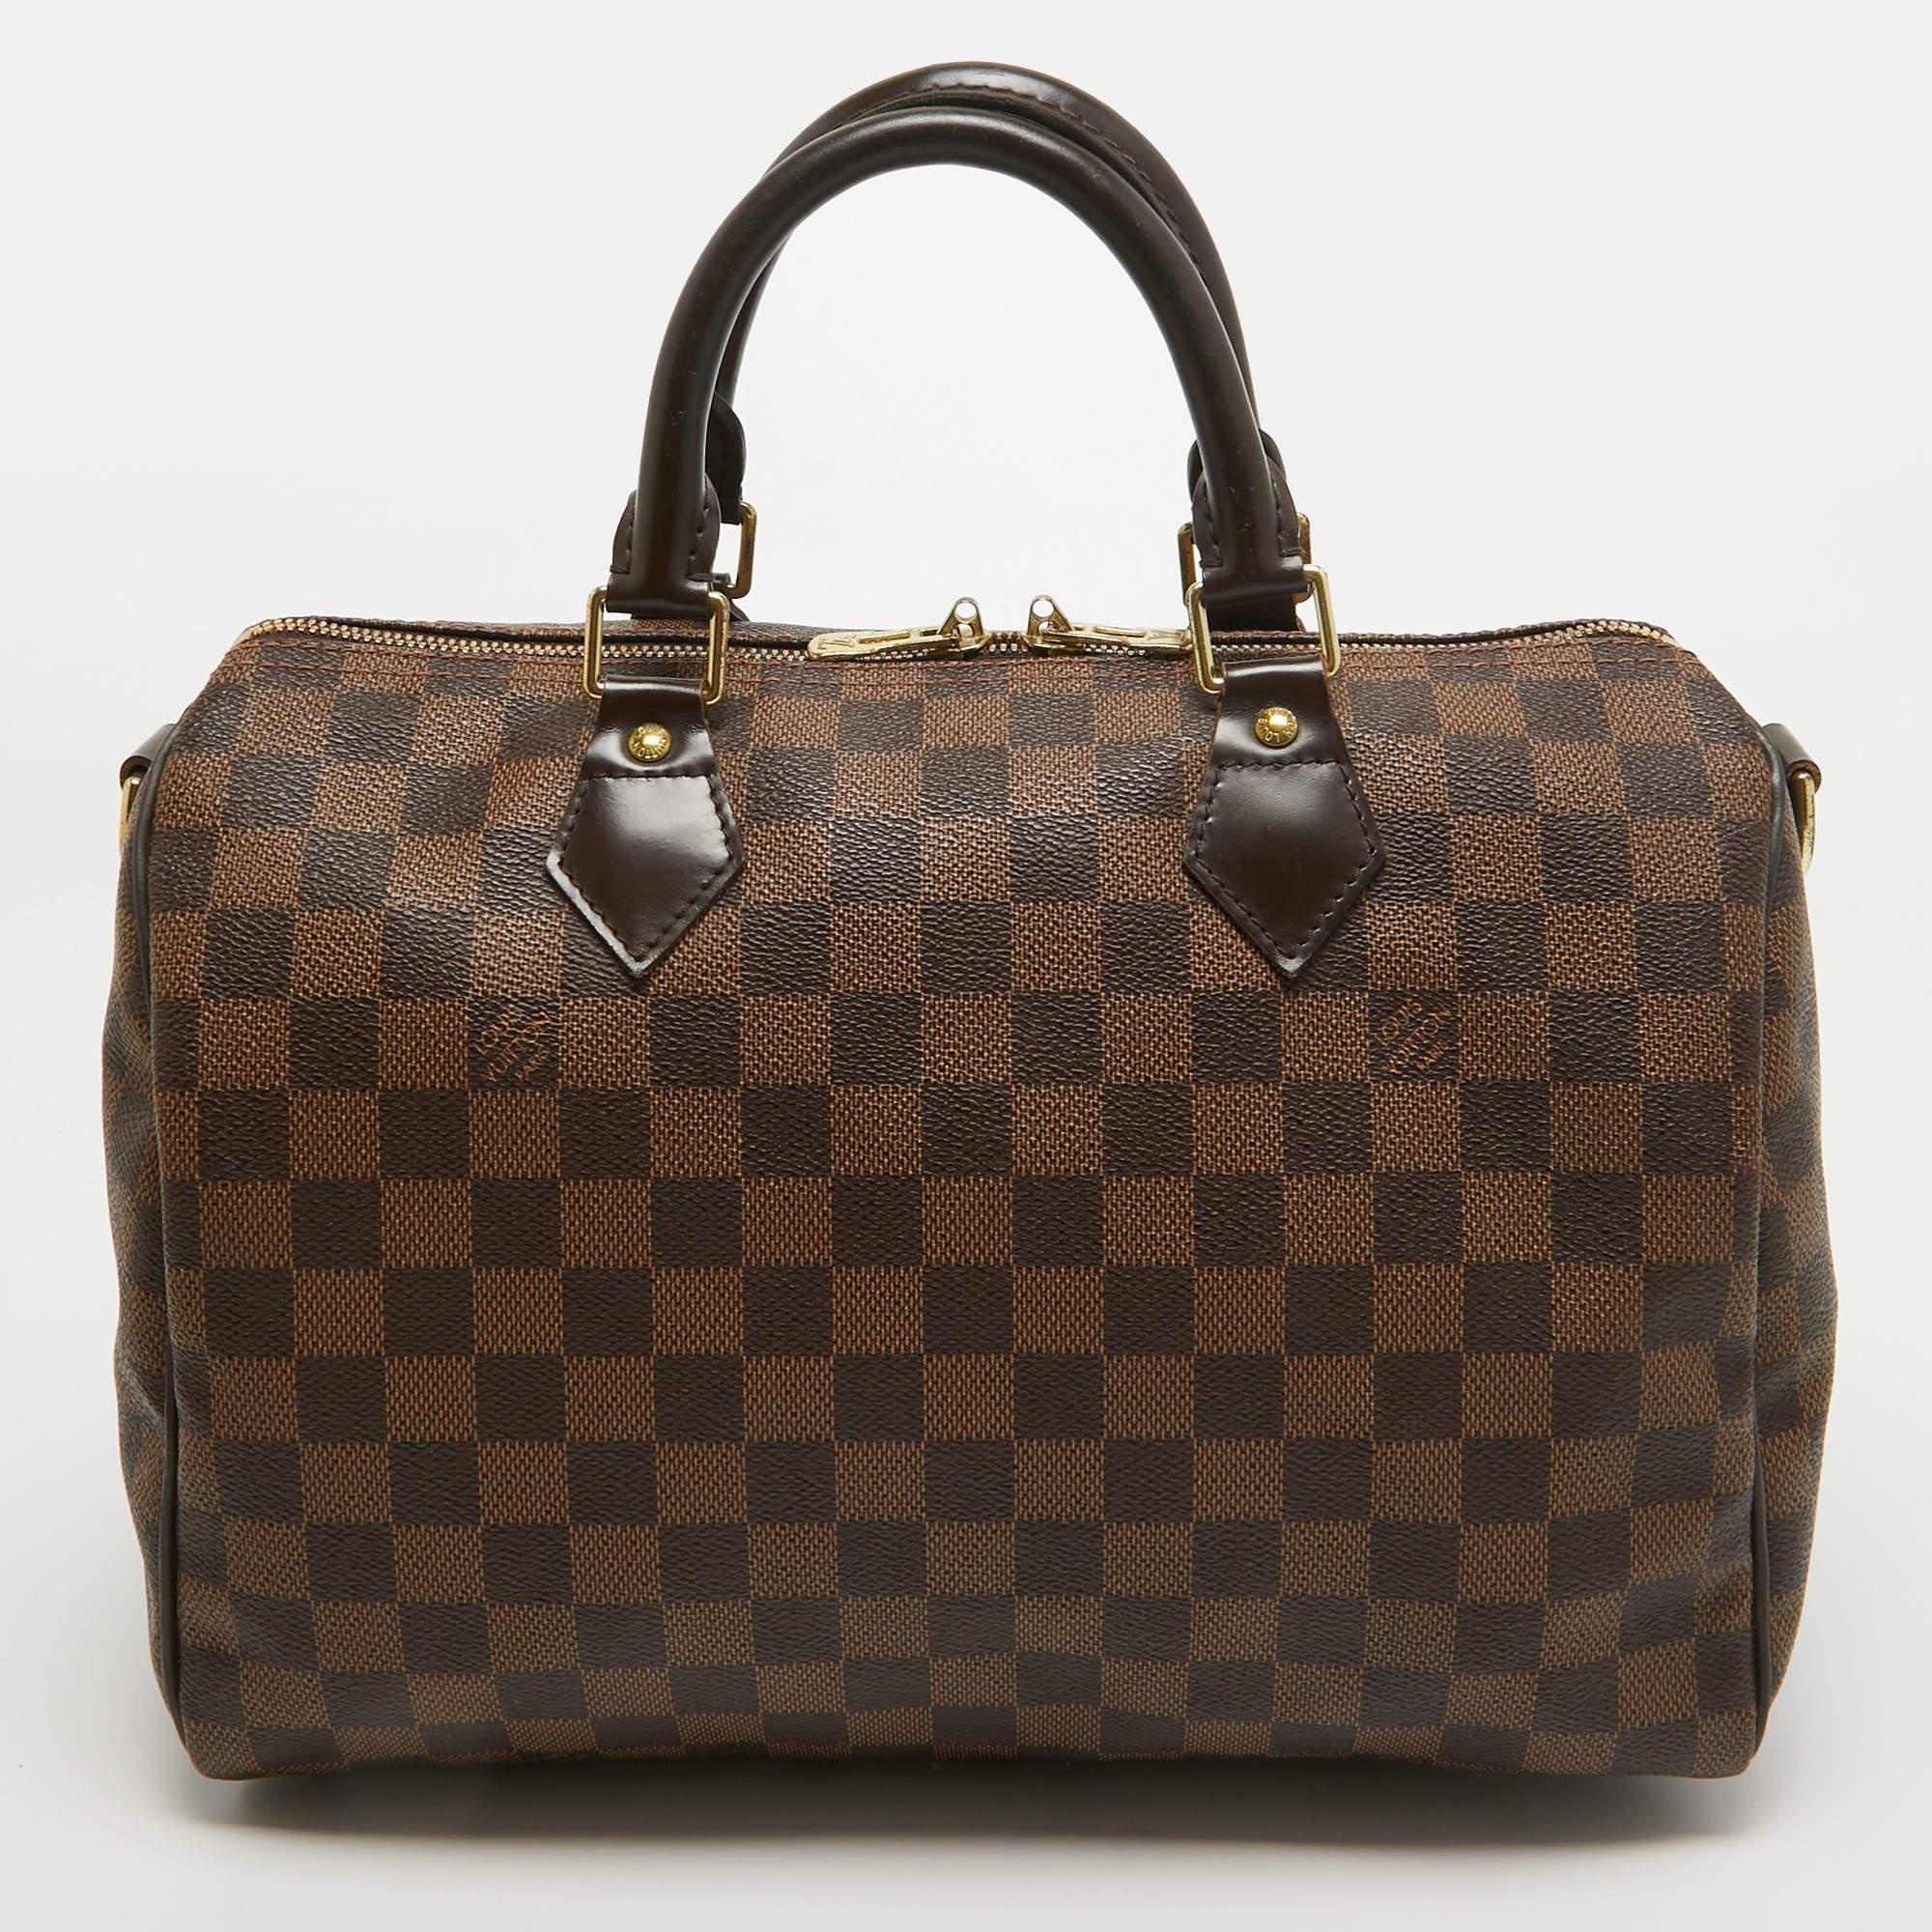 A classic handbag comes with the promise of enduring appeal, boosting your style time and again. This Louis Vuitton Speedy 30 Bandoulière bag is one such creation. It’s a fine purchase.

Includes: Brand Dustbag, Detachable Strap

